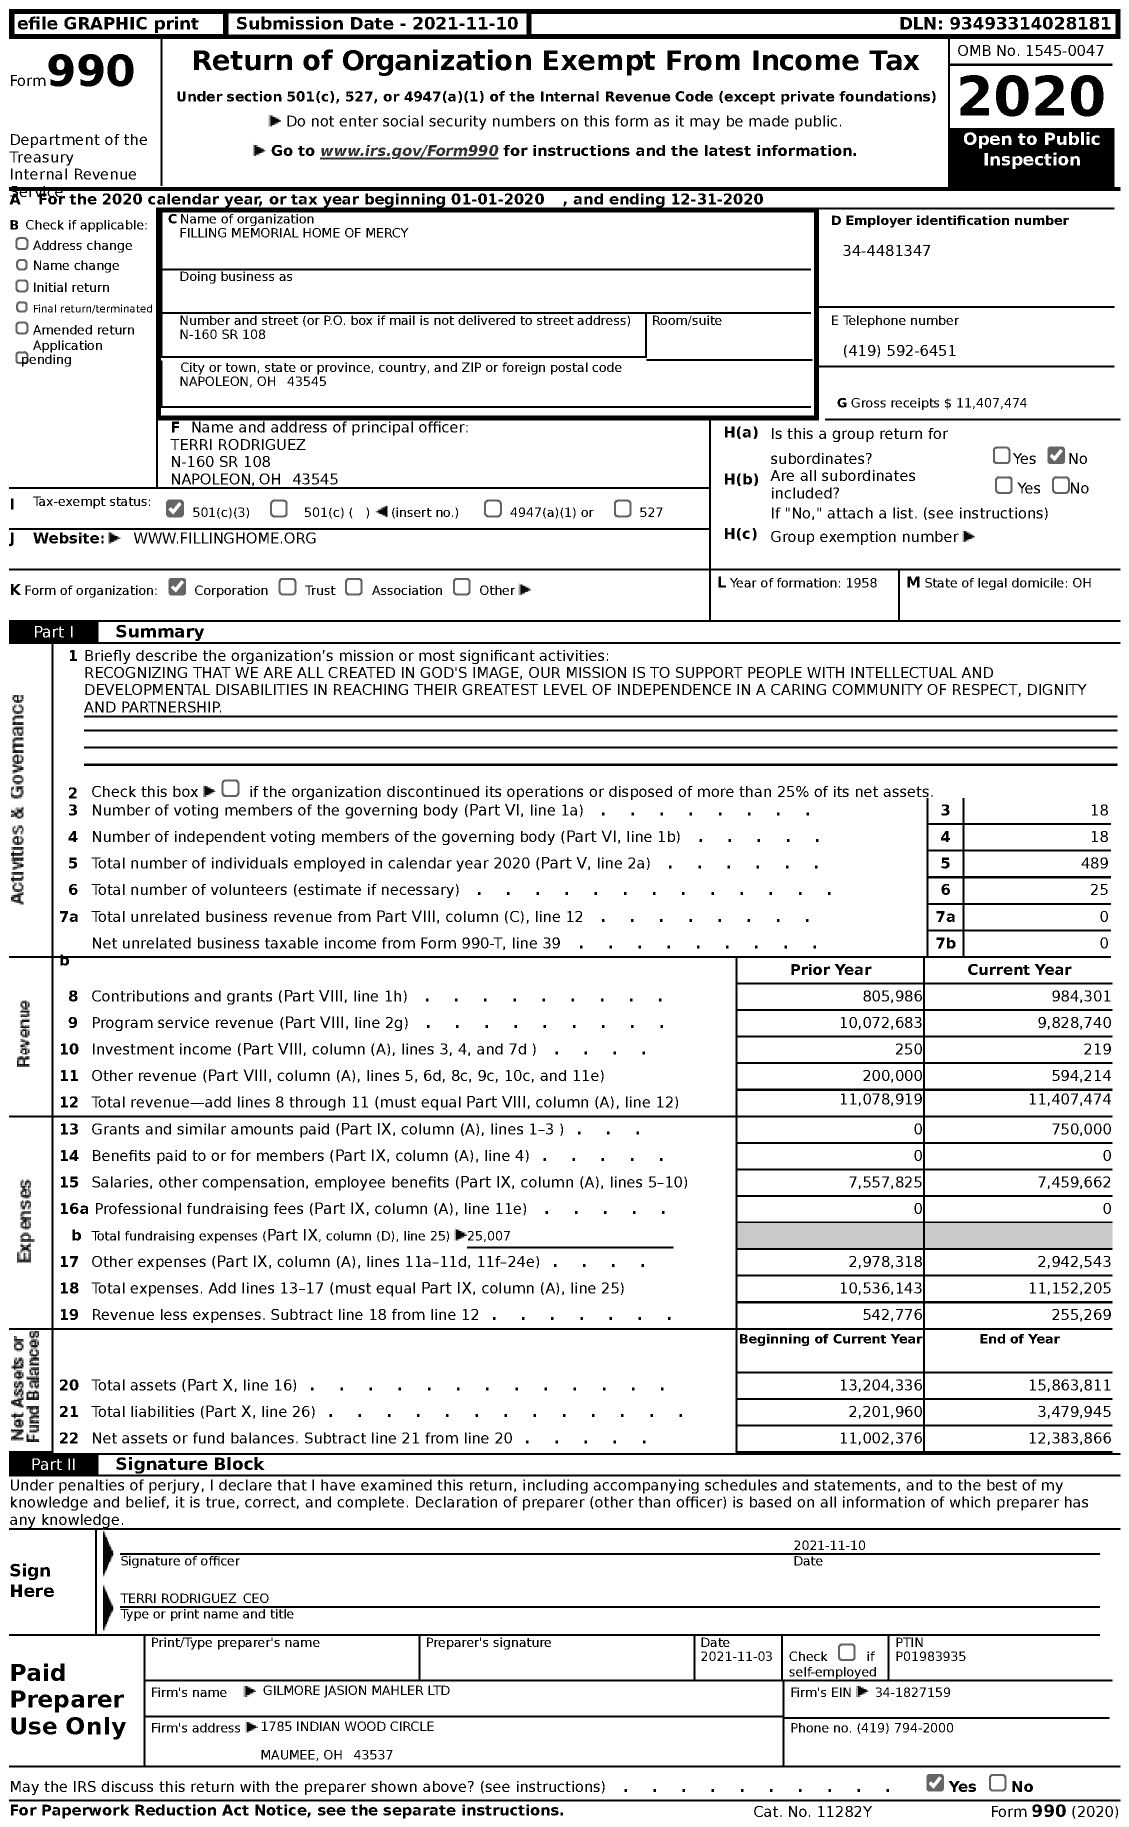 Image of first page of 2020 Form 990 for Filling Memorial Home of Mercy